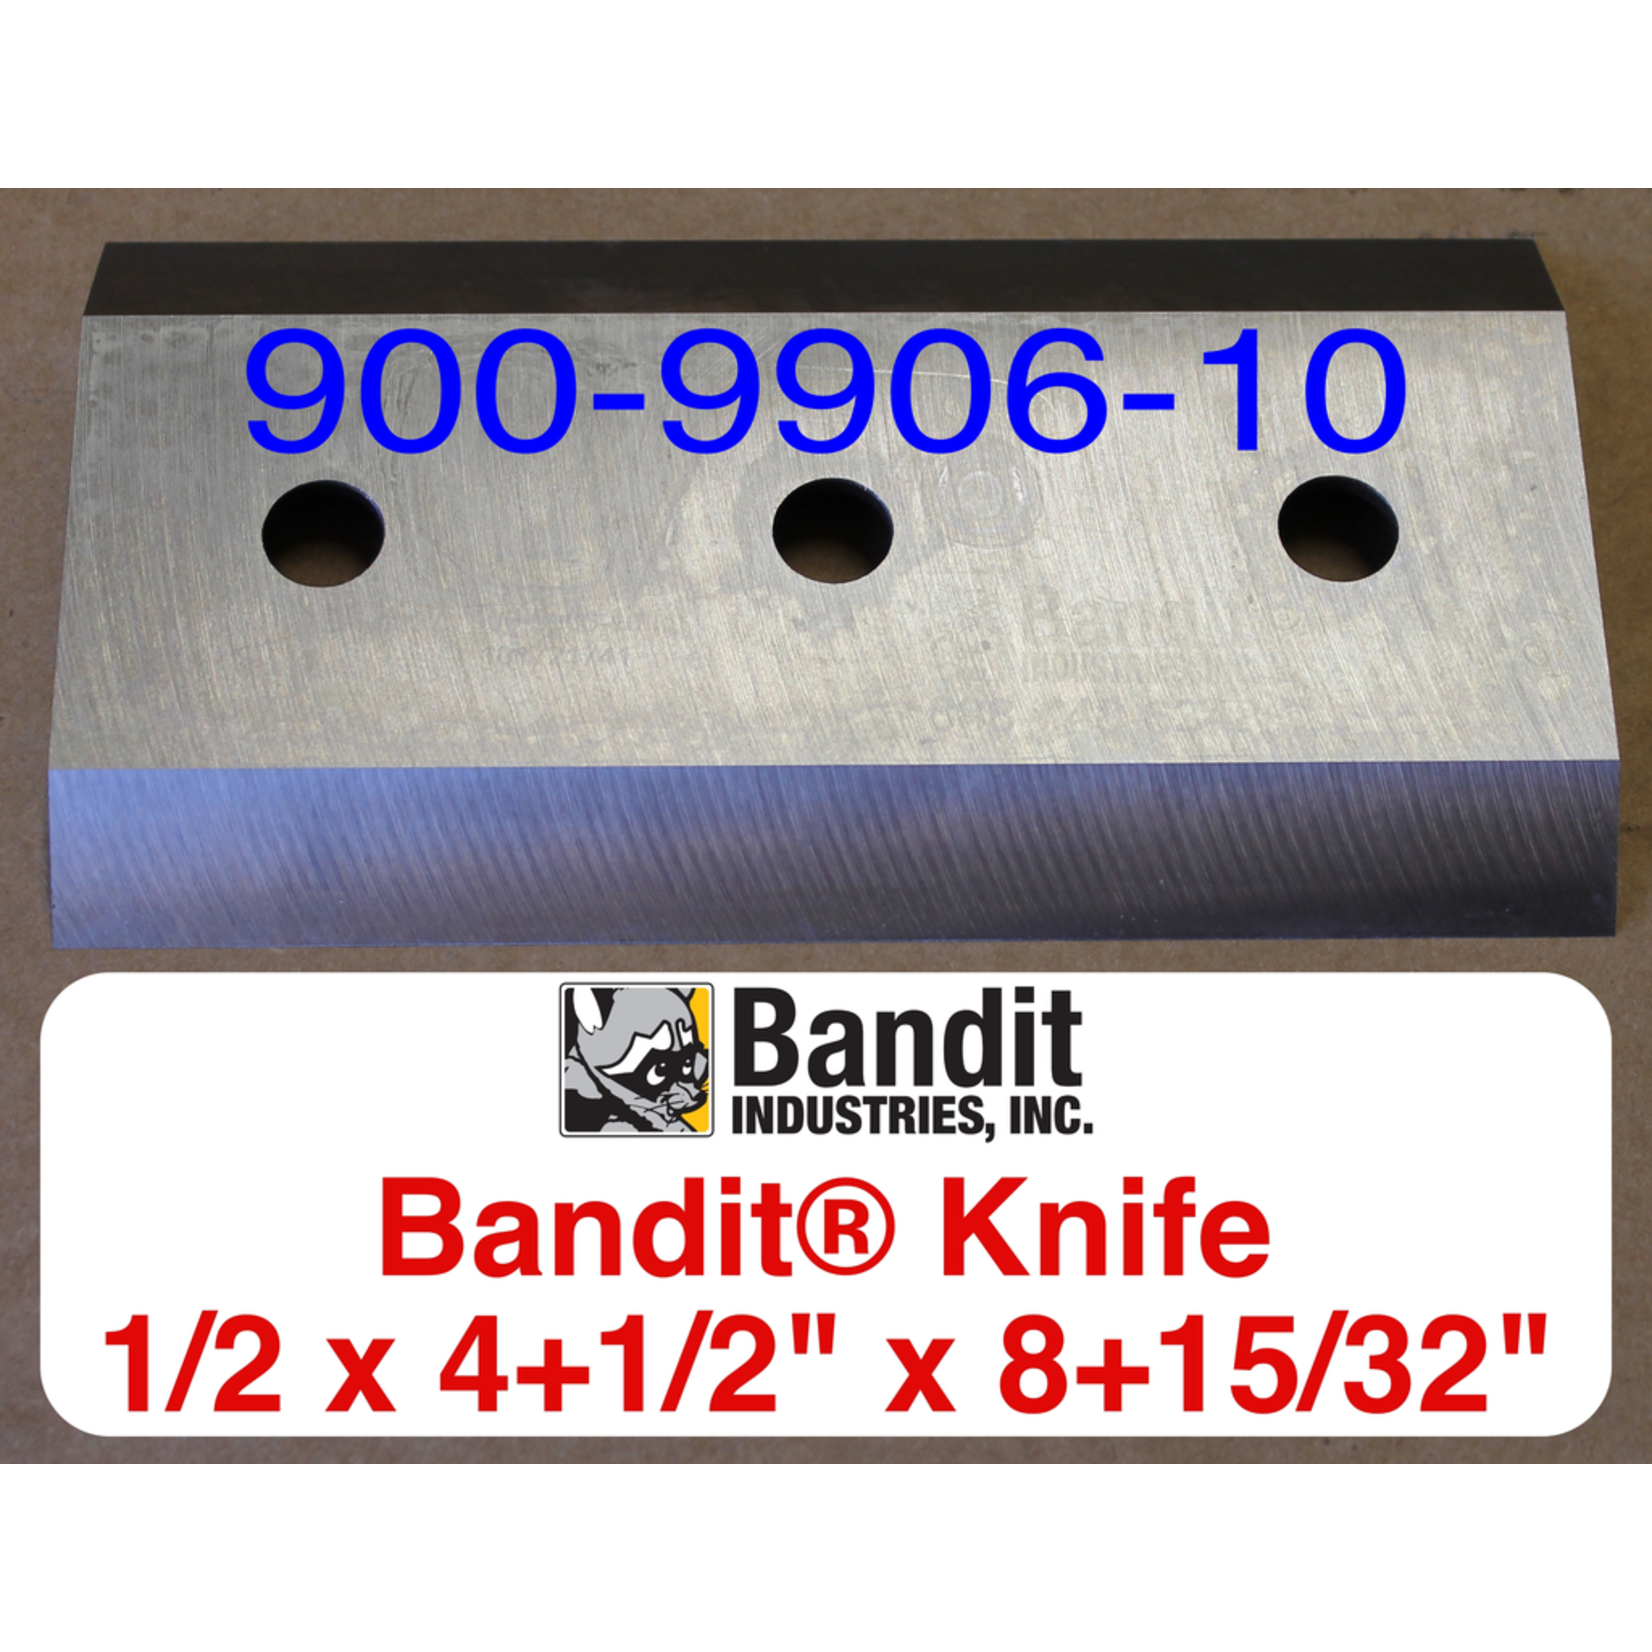 Knife for M255 1/2” x 4+1/2" x 8+15/32"